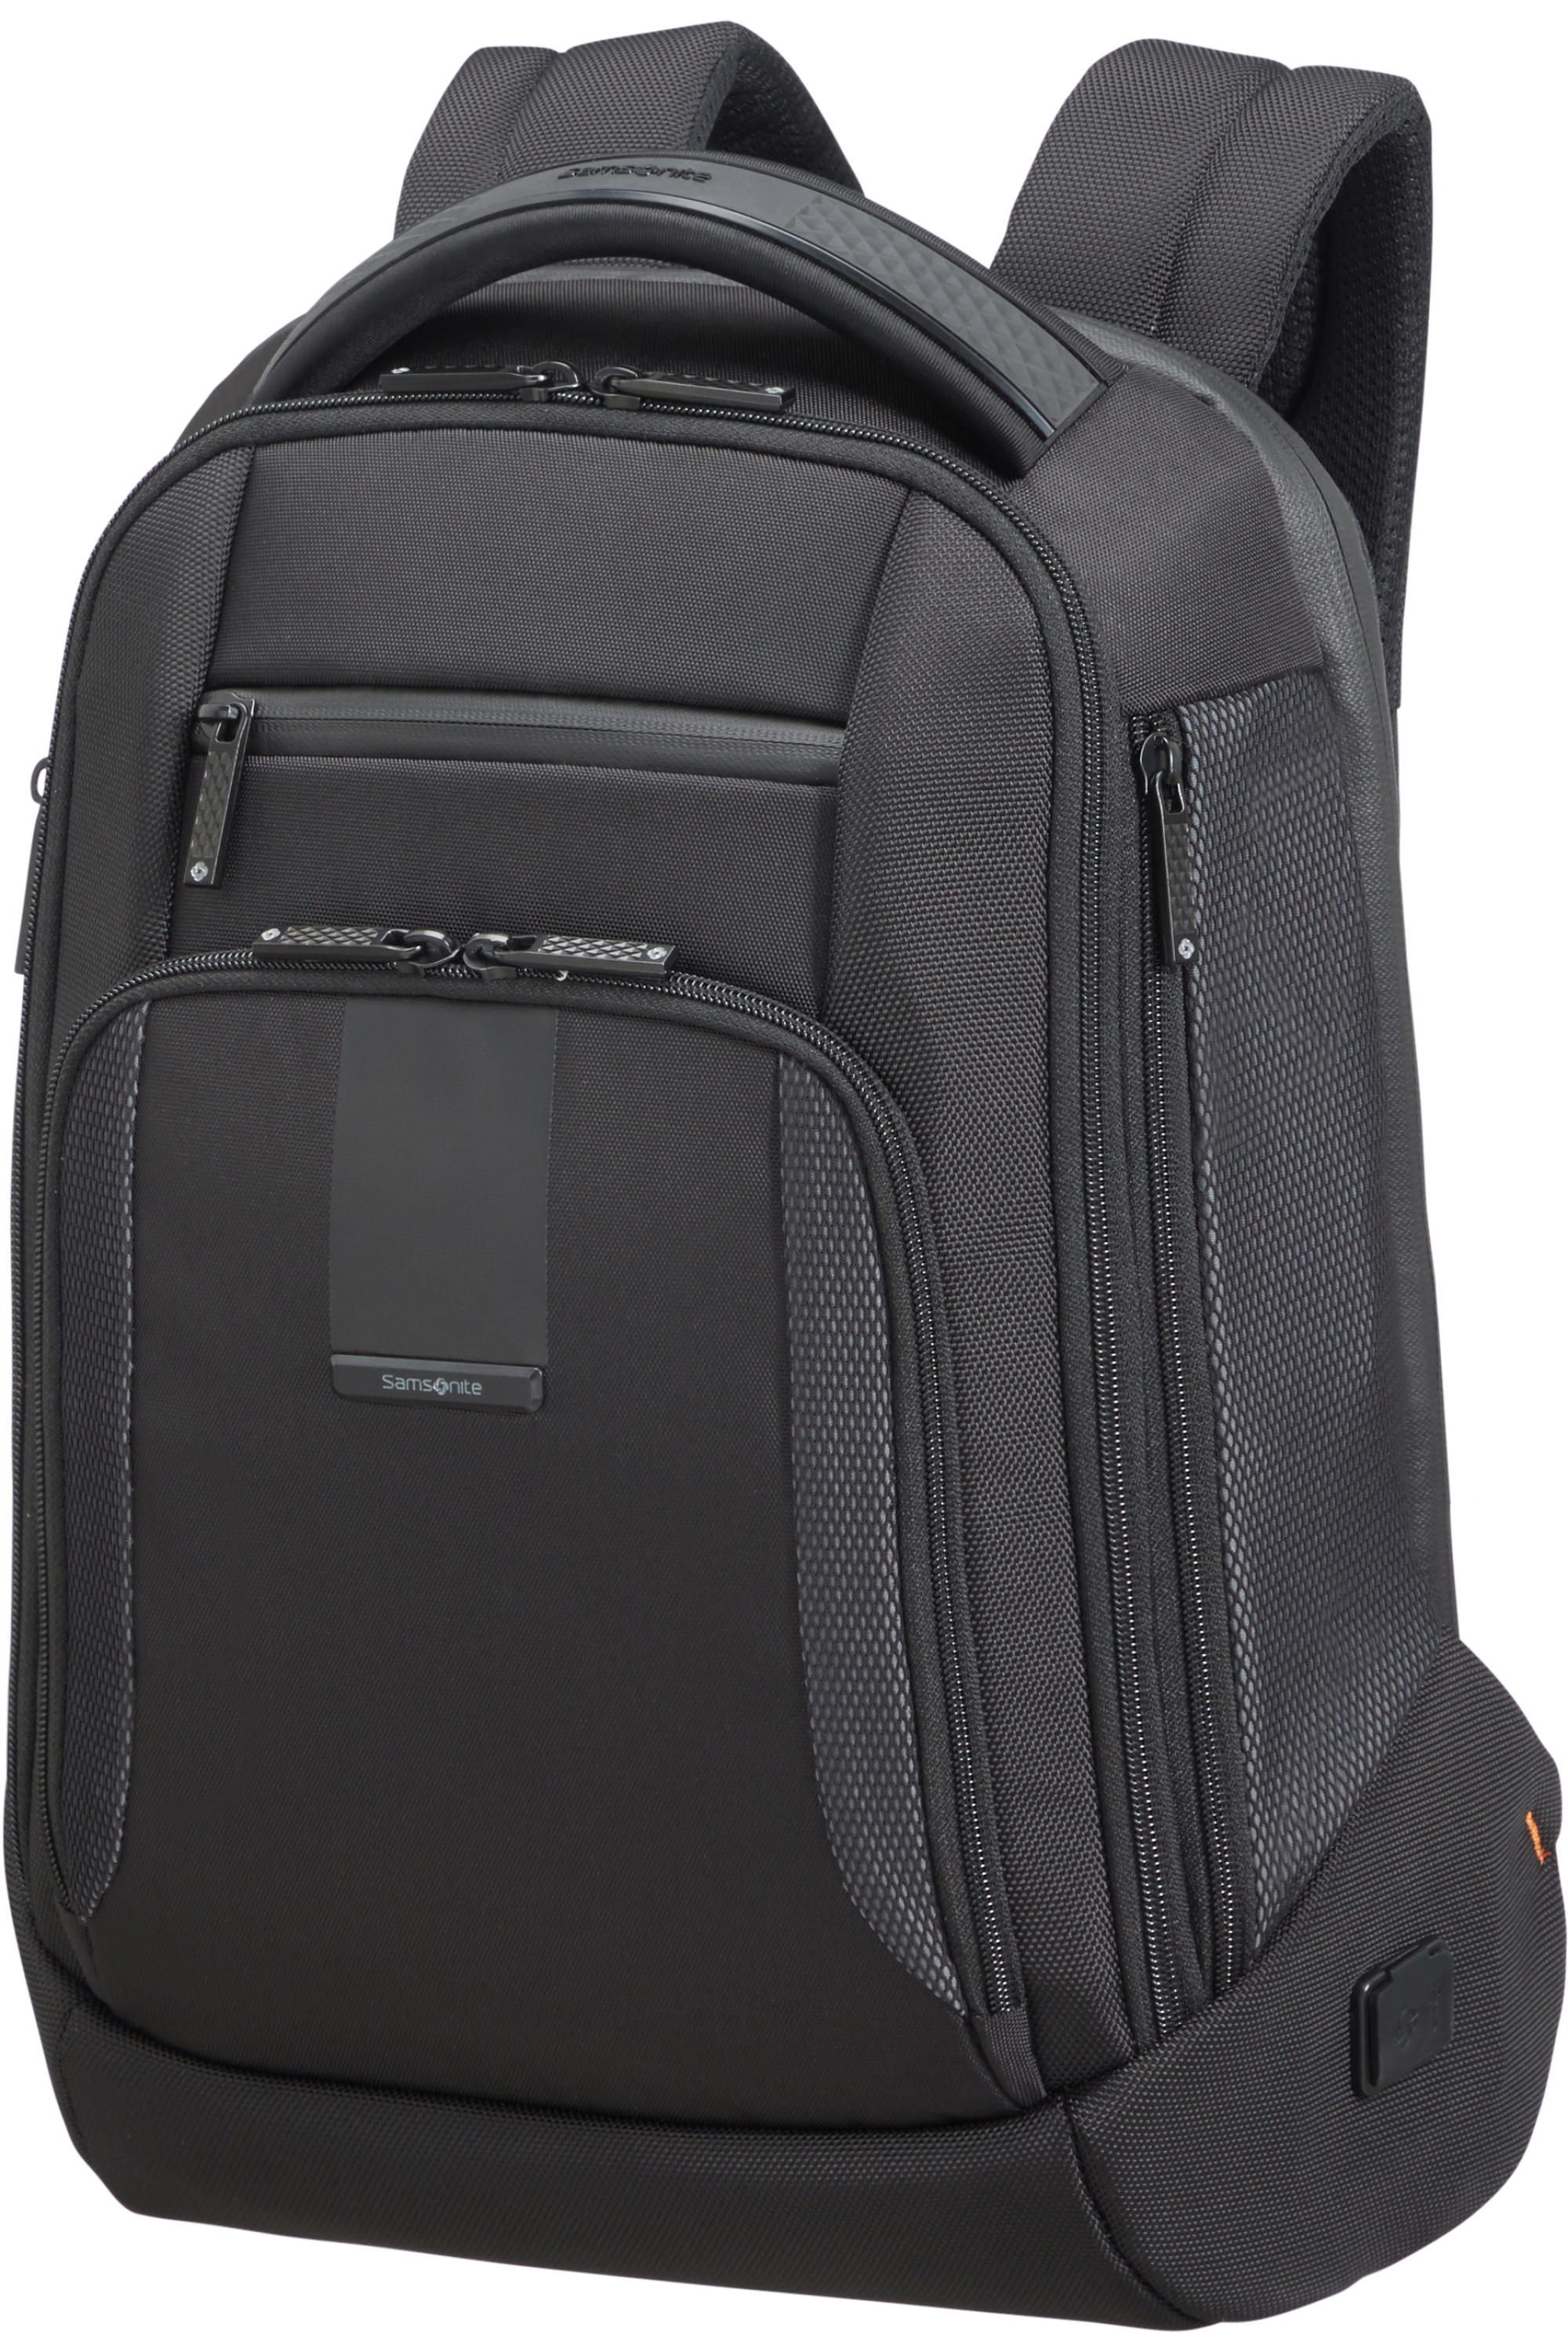 134913-1041-134913_1041_cityscape_evo_lpt-_backpack_14-1_front34-49fba58c-8593-4604-a2c3-ab6000c61d23-png